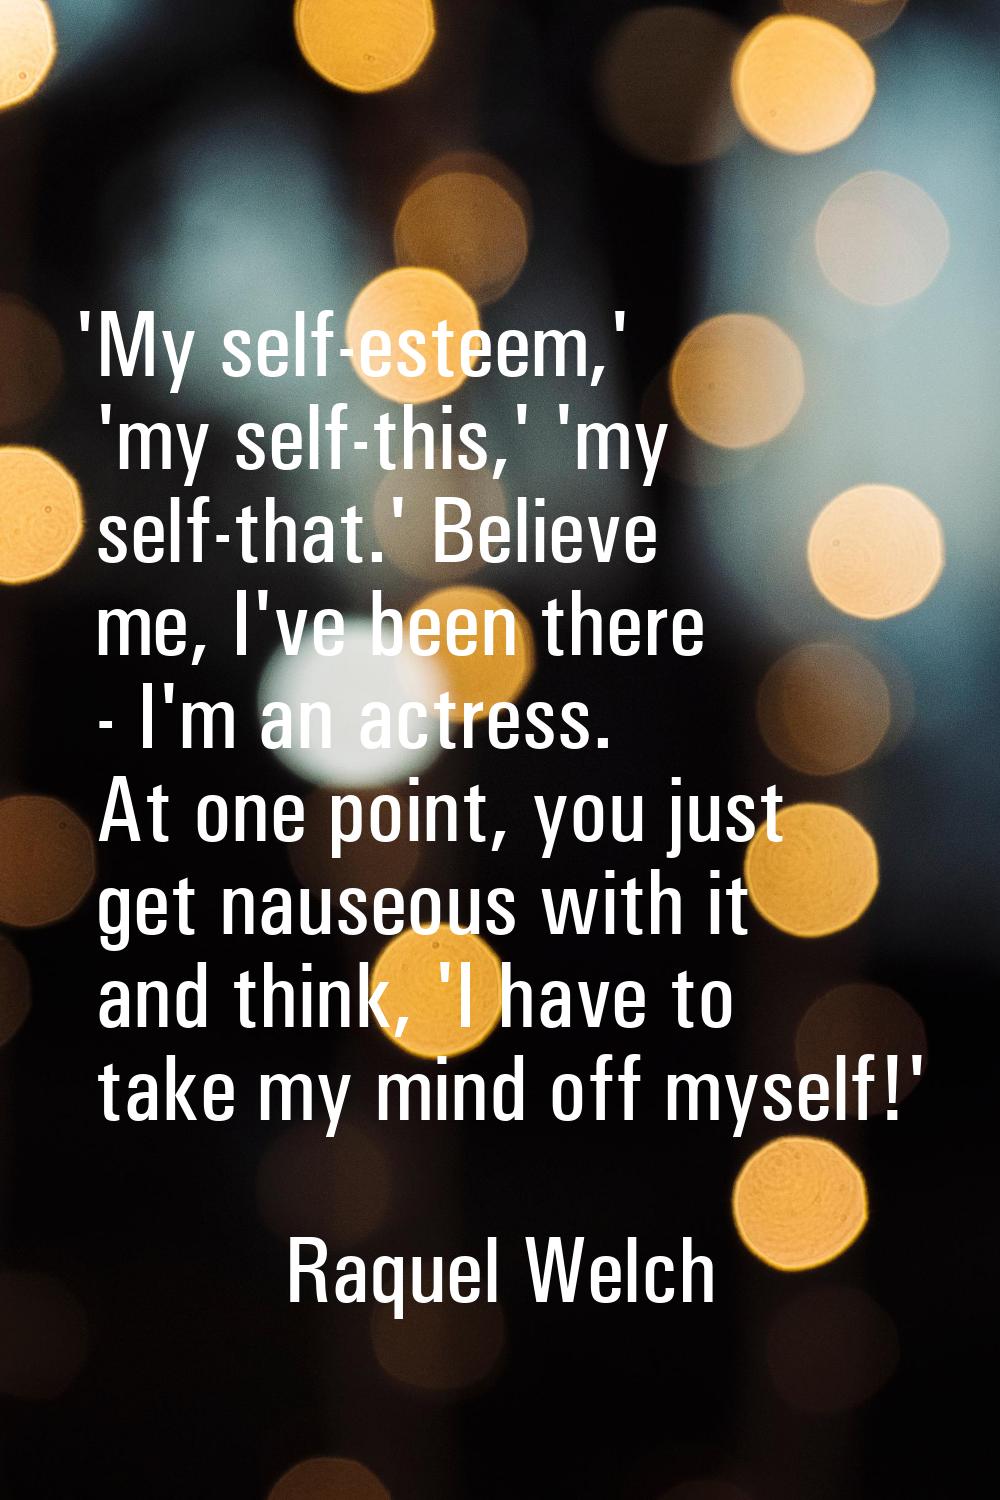 'My self-esteem,' 'my self-this,' 'my self-that.' Believe me, I've been there - I'm an actress. At 